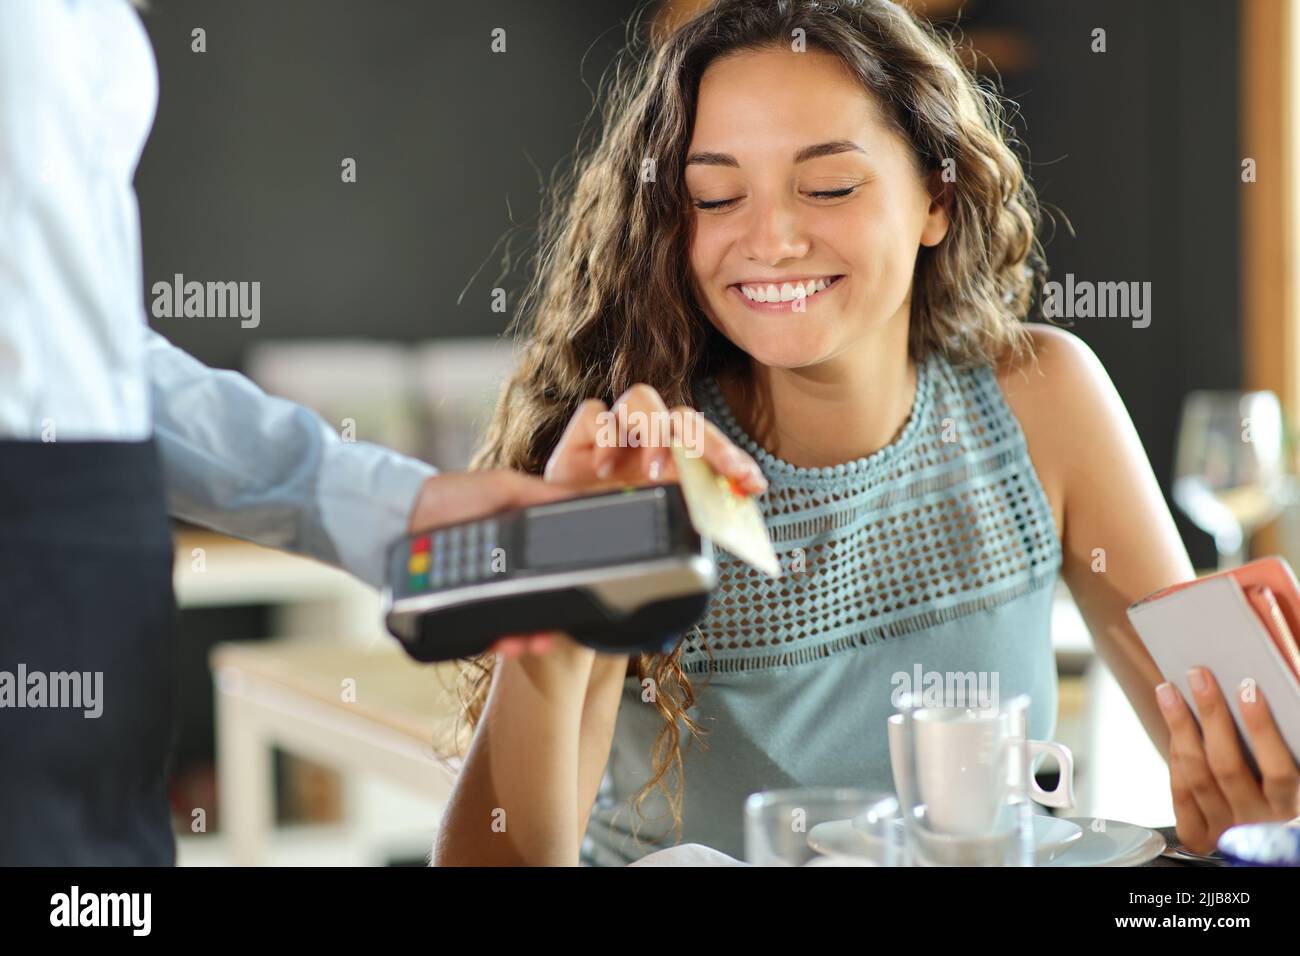 Happy woman paying lunch in a restaurant with credit card Stock Photo